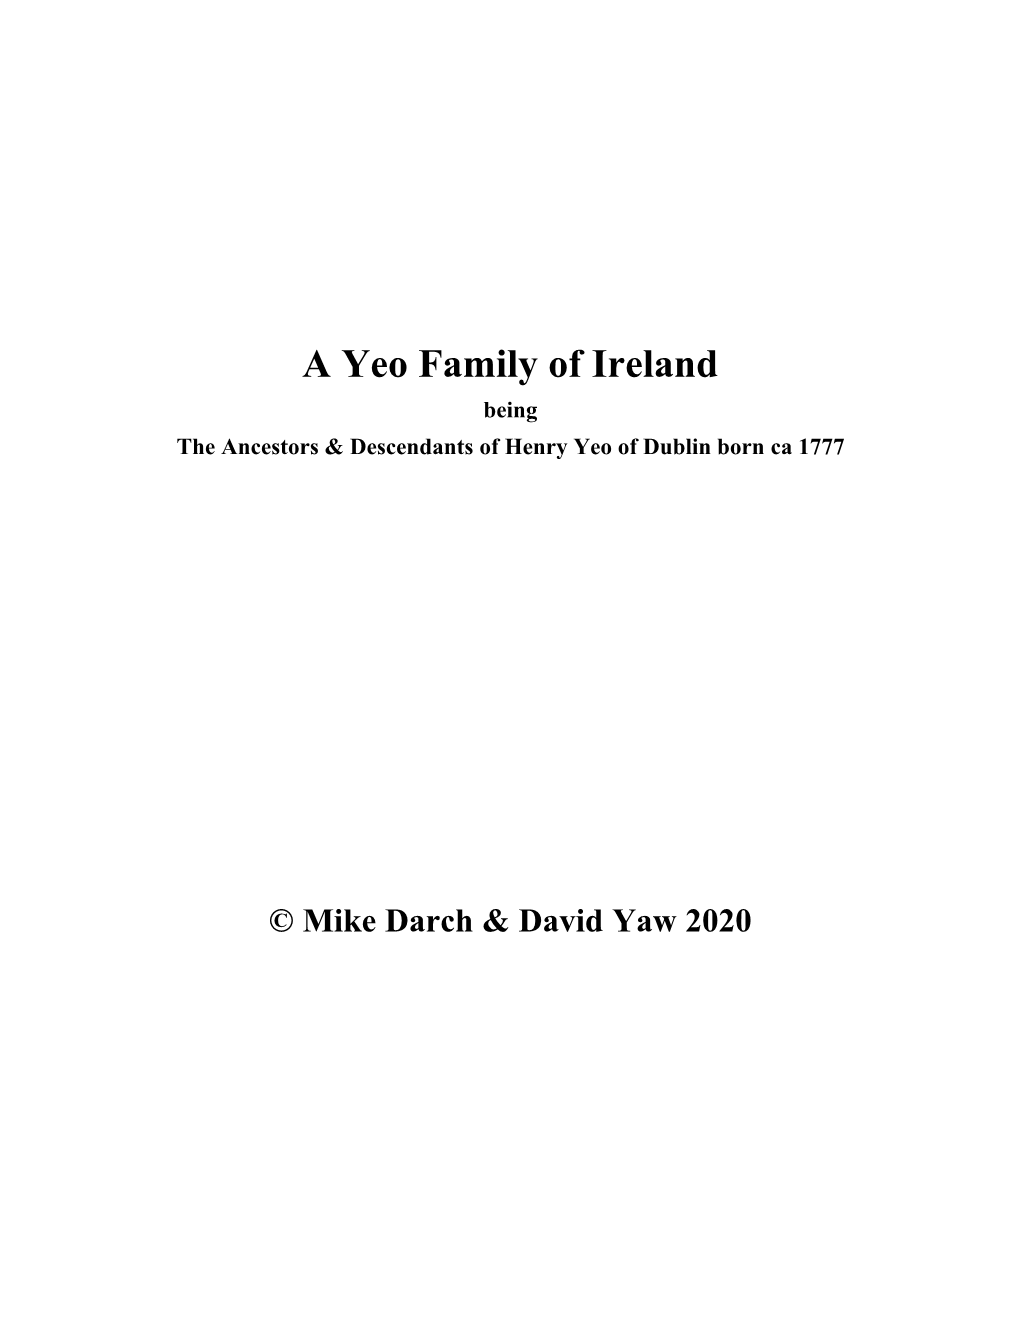 A Yeo Family of Ireland Being the Ancestors & Descendants of Henry Yeo of Dublin Born Ca 1777